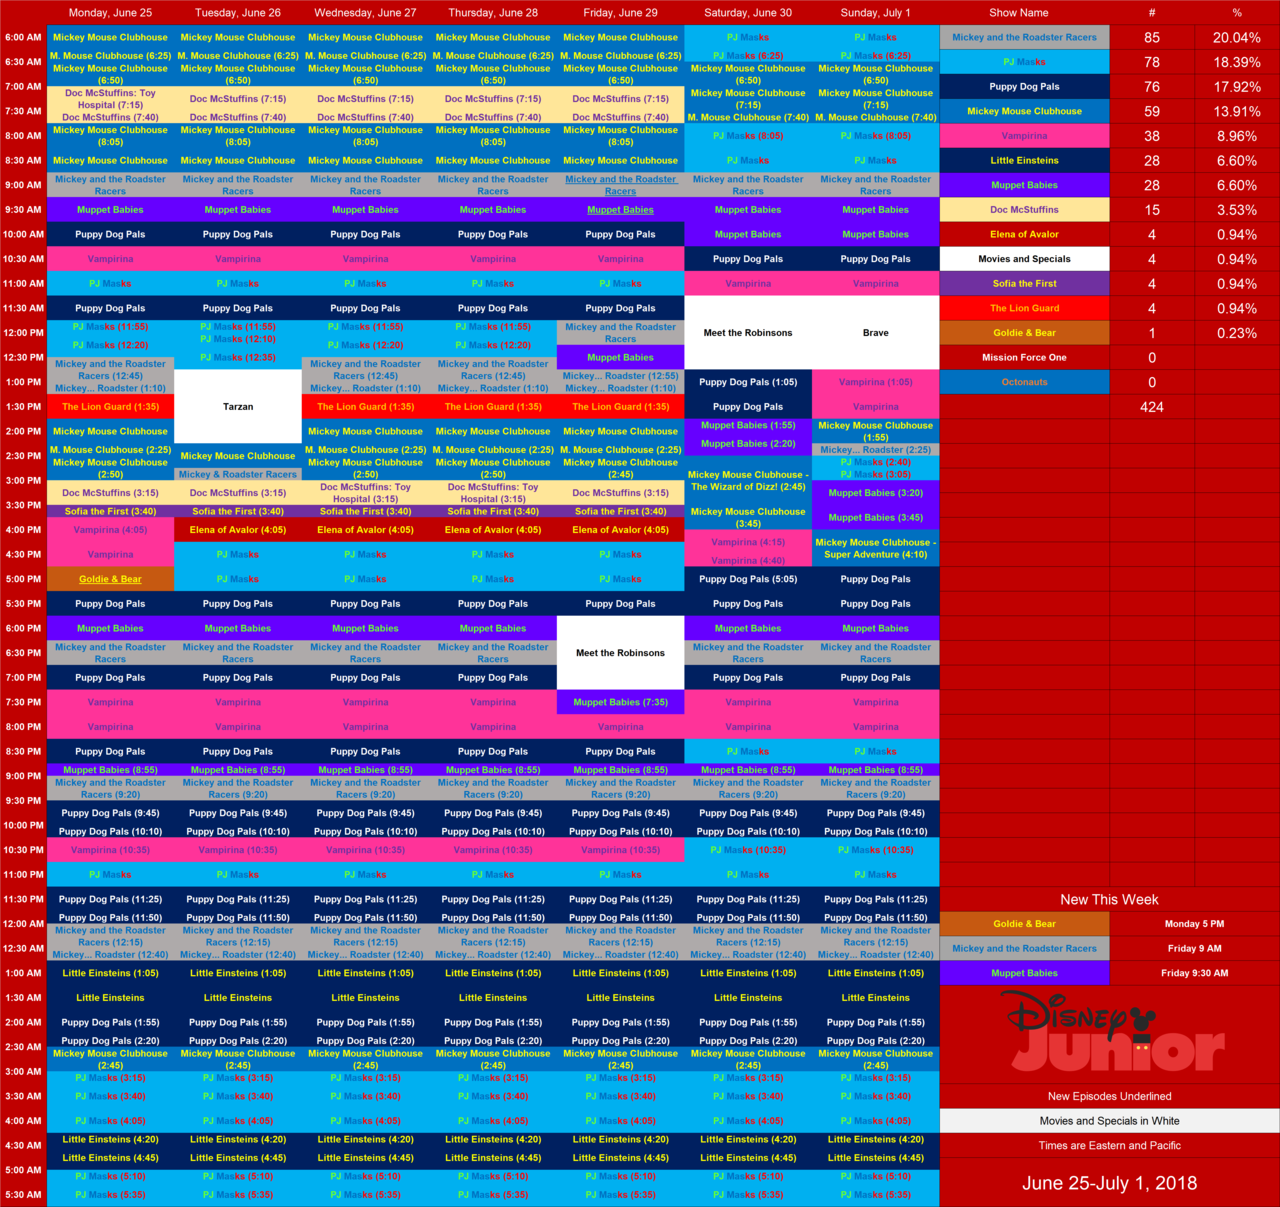 disney schedule thread and archive — here's disney junior usa's